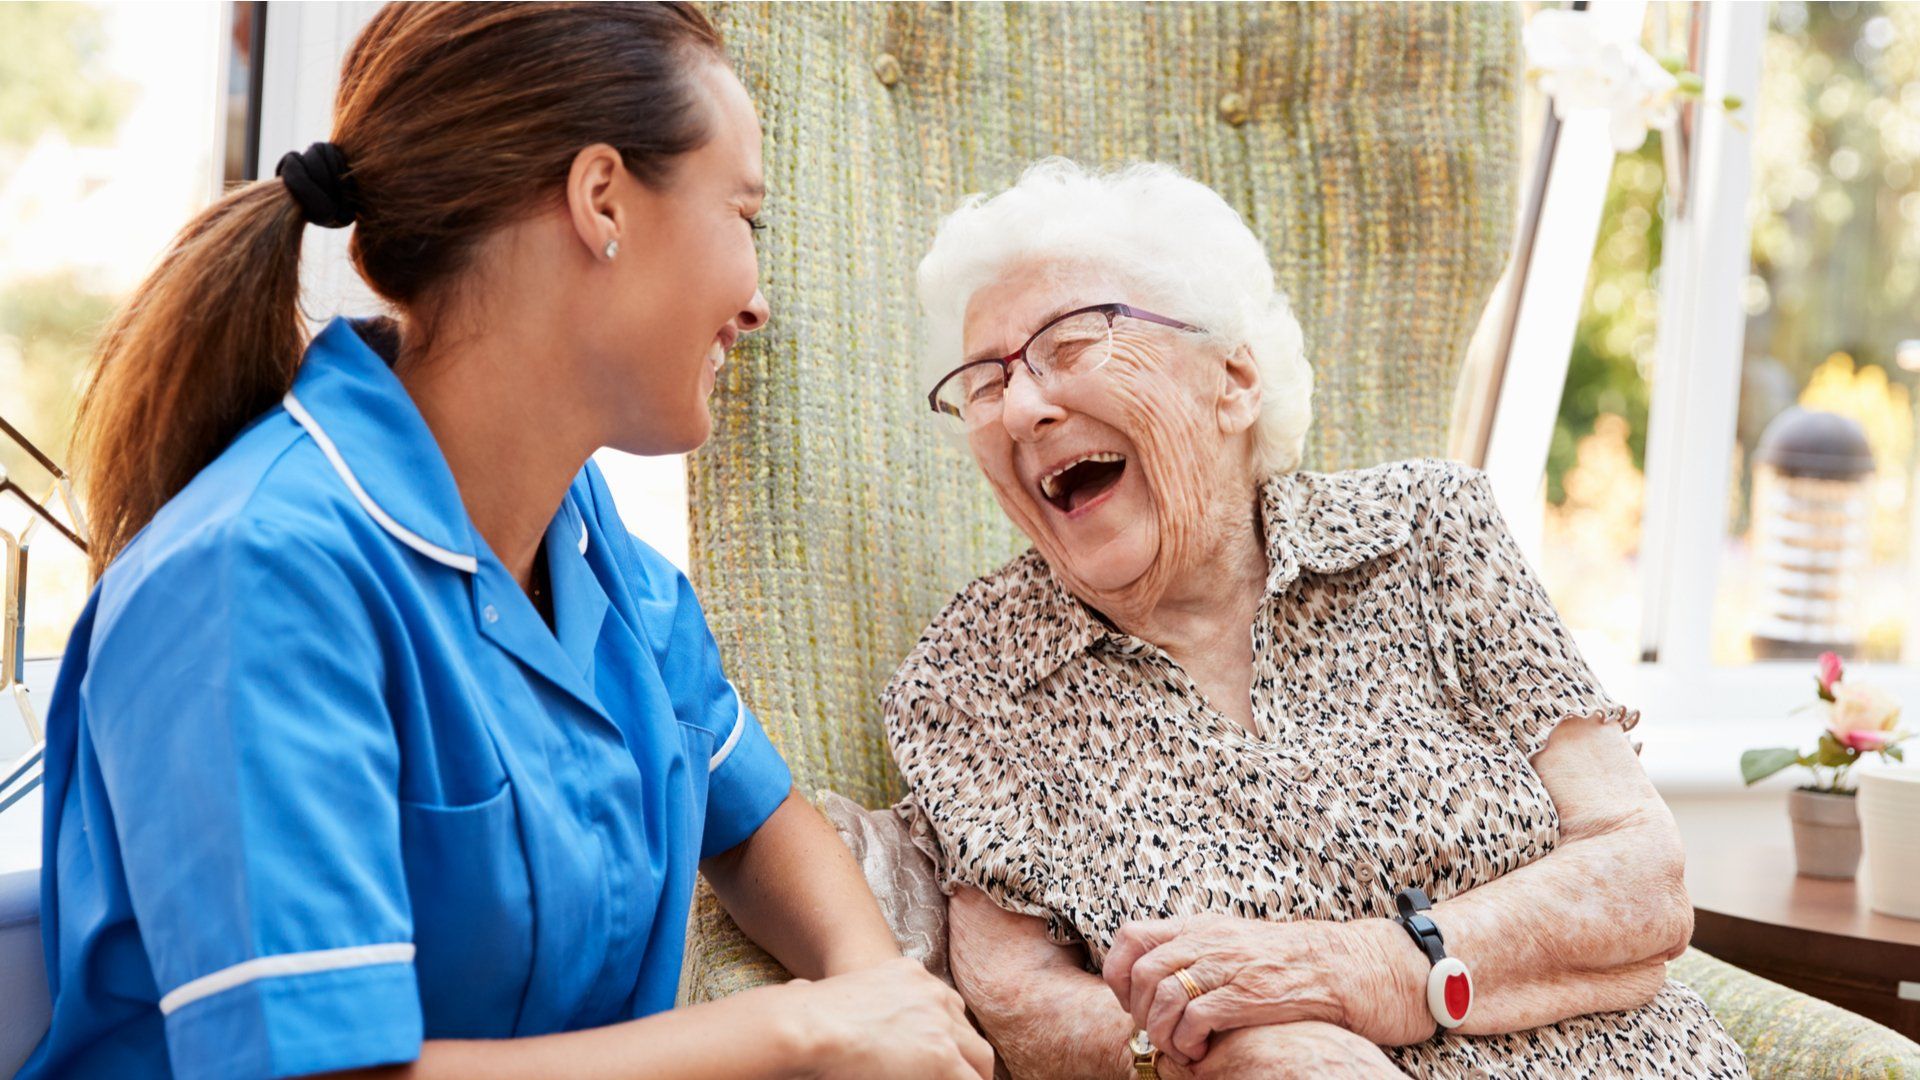 CHOOSE TINDELL CARE FOR IN-HOME SENIOR CARE IN PITTSBURGH & MONROEVILLE, PA